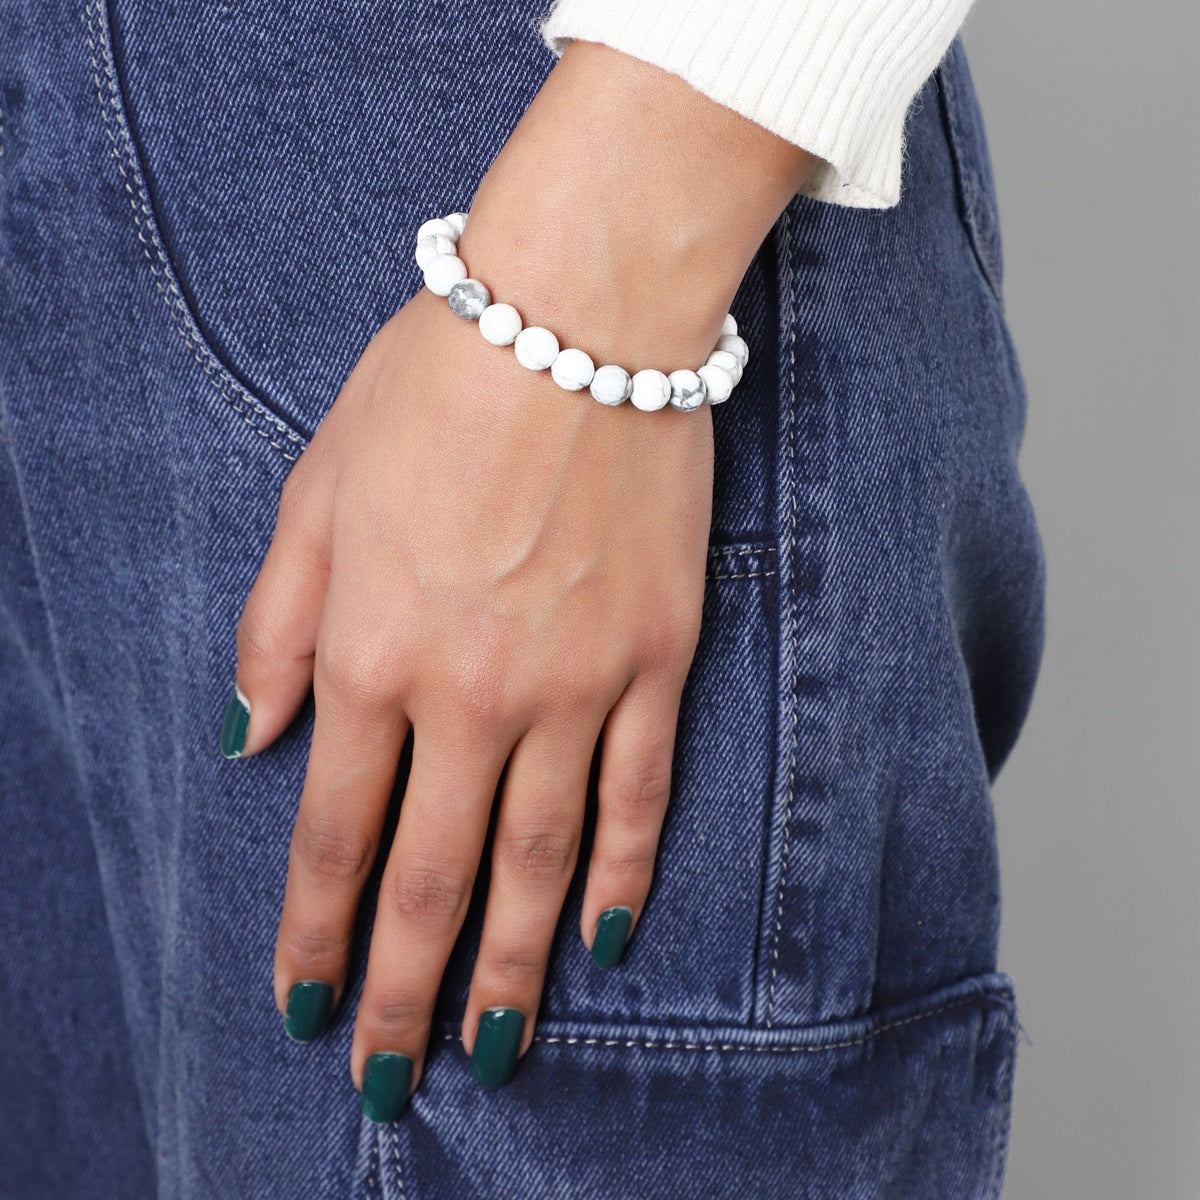  lifestyle image featuring the Howlite Stretch Bracelet being worn, demonstrating its seamless integration into everyday fashion with a touch of spirituality.